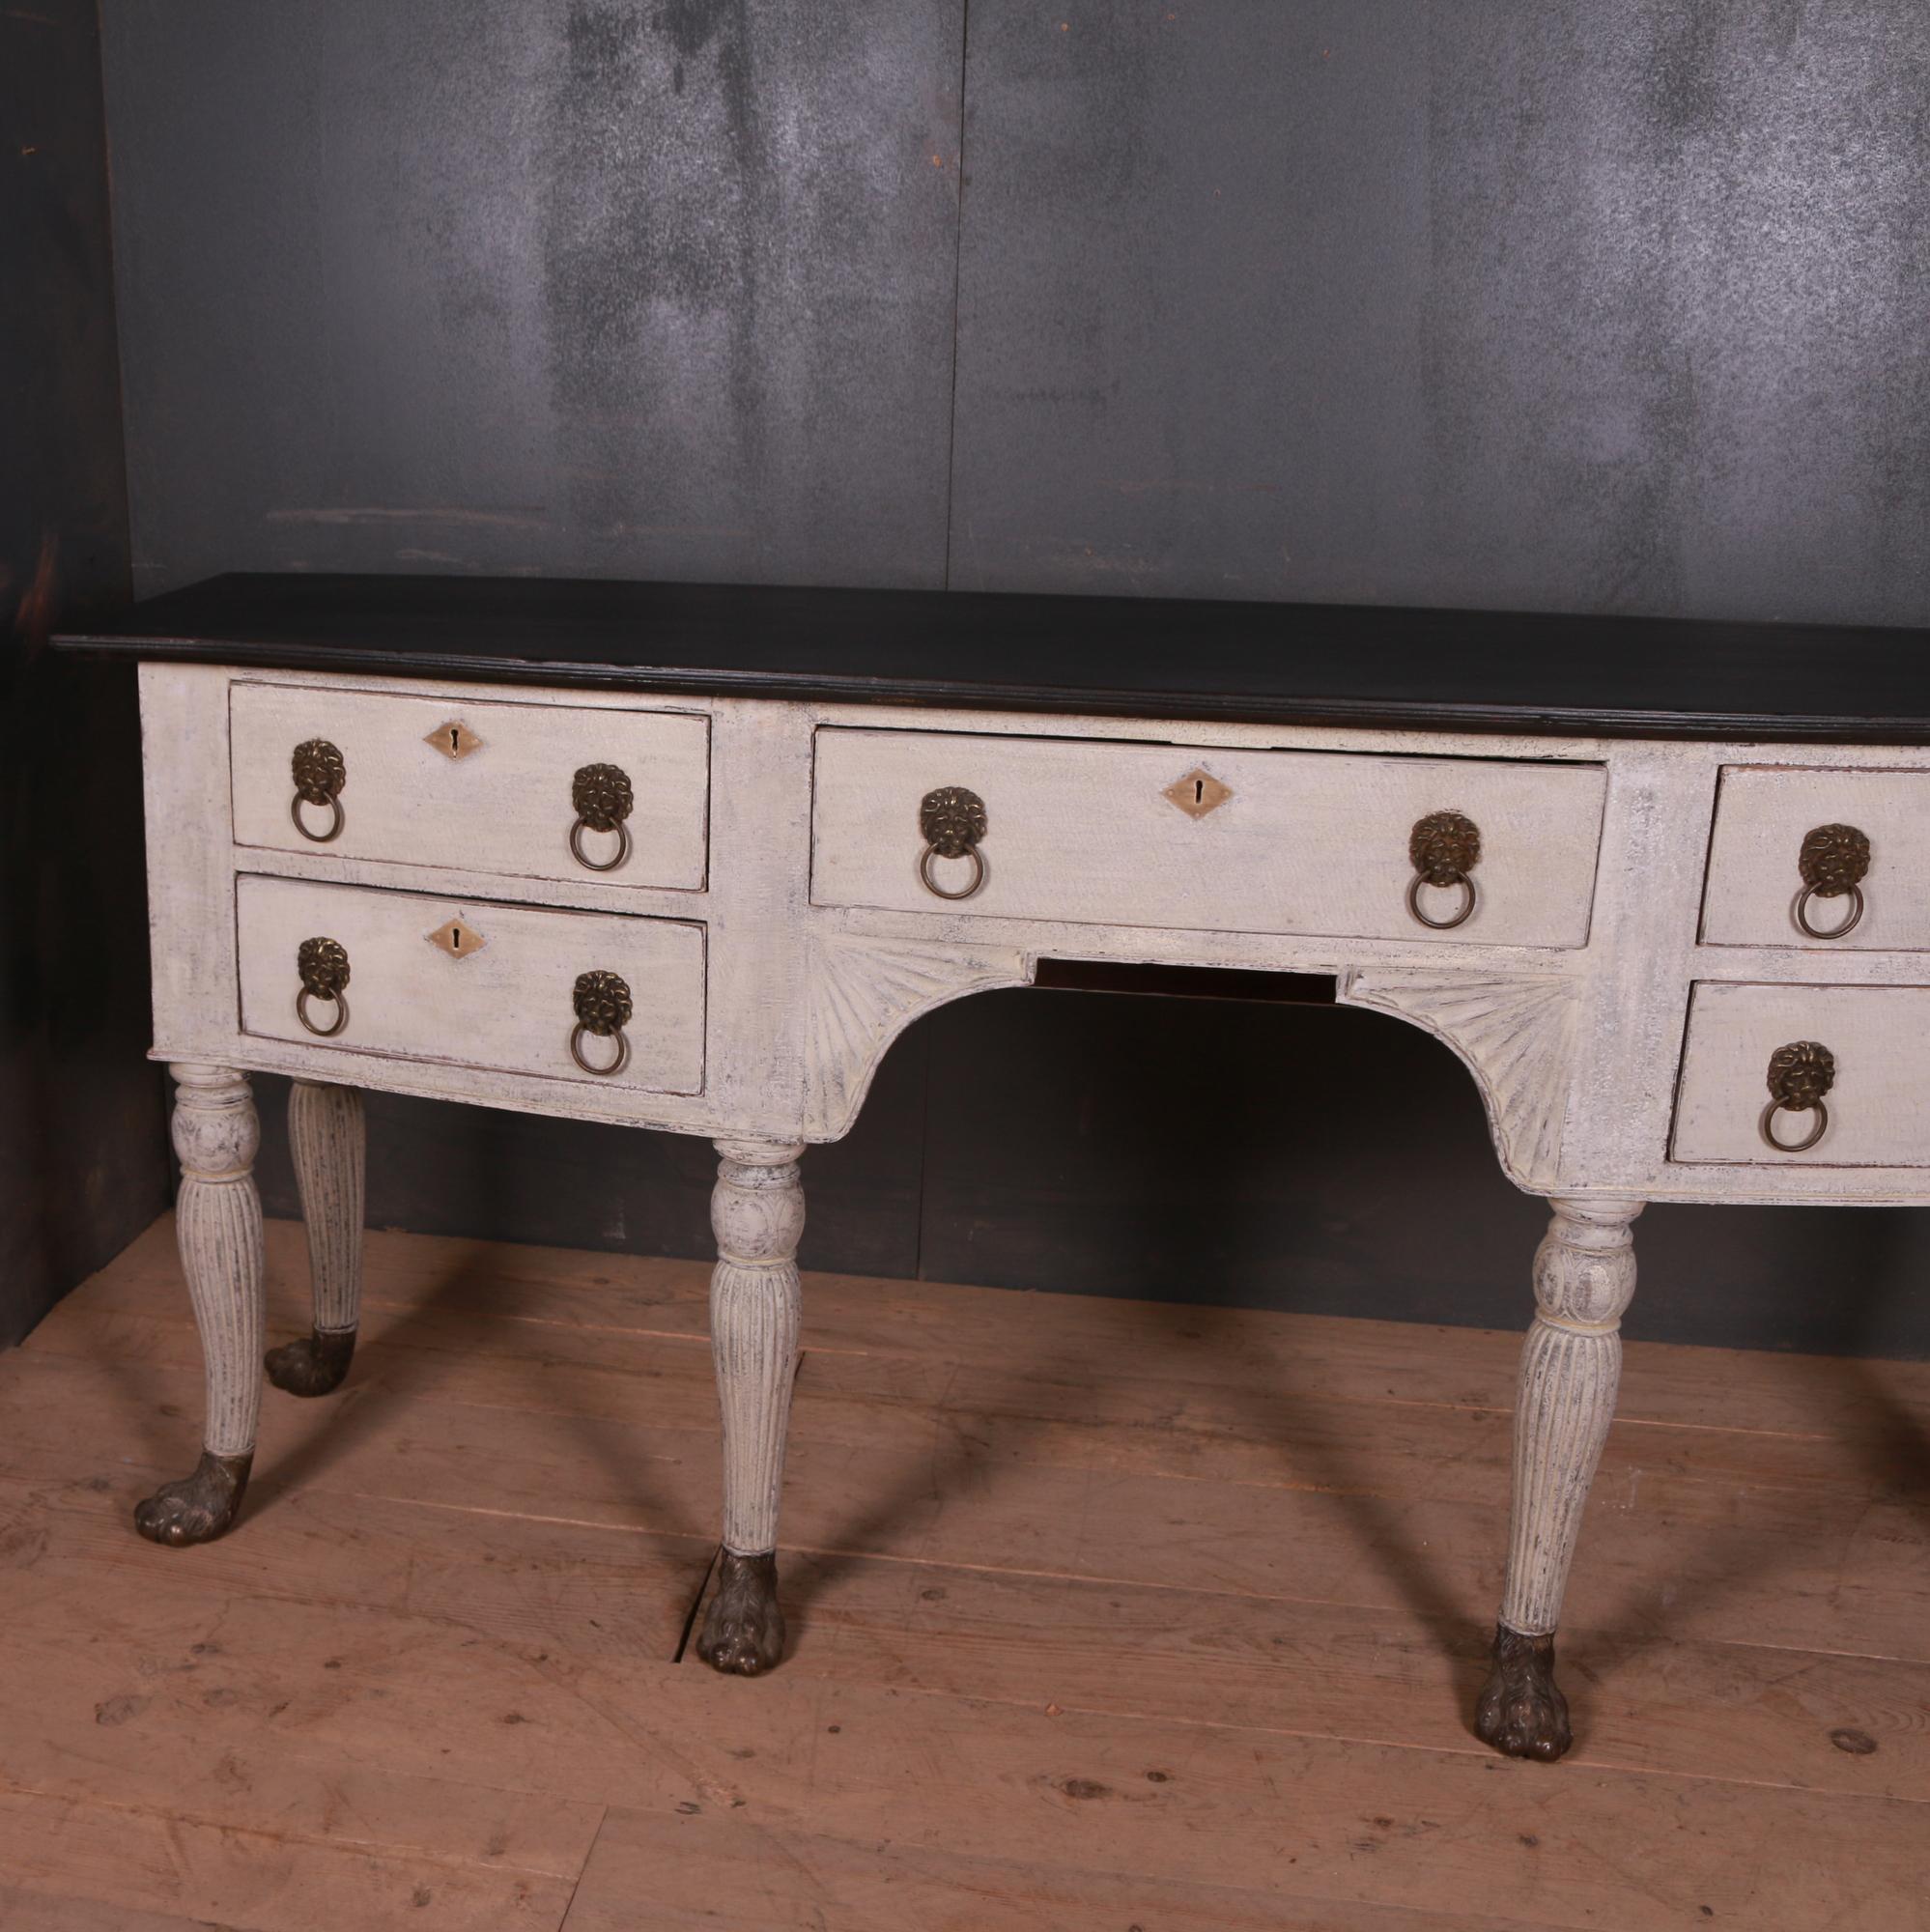 Stunning early 19th century bow fronted sideboard with brass paw feet, 1820.

Dimensions:
76.5 inches (194 cms) wide
20 inches (51 cms) deep
35.5 inches (90 cms) high.